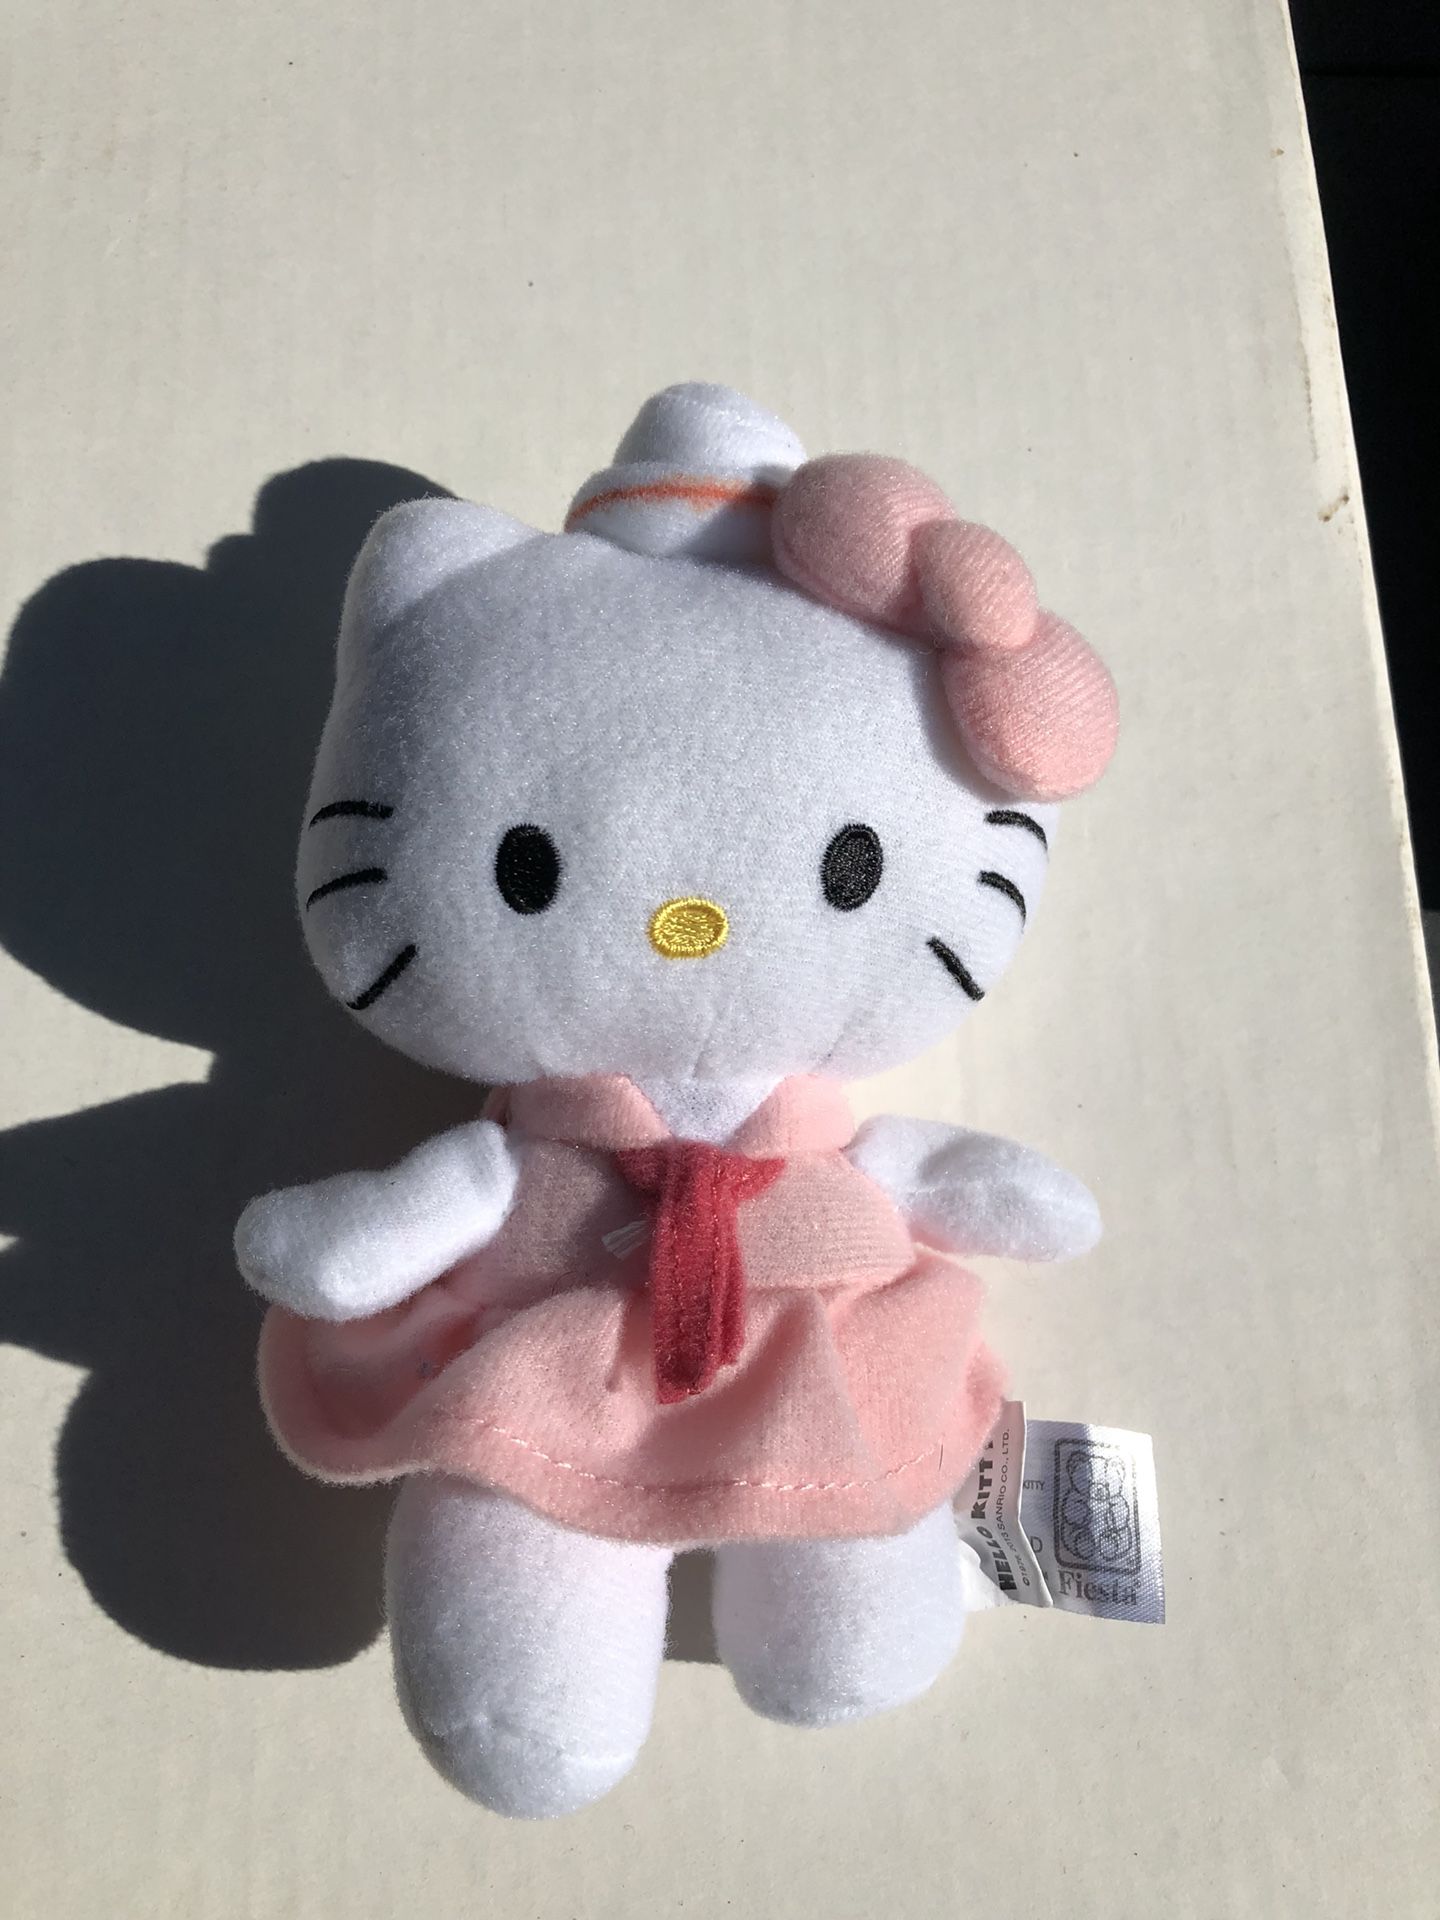 Hello Kitty stuffed animal with carrying case